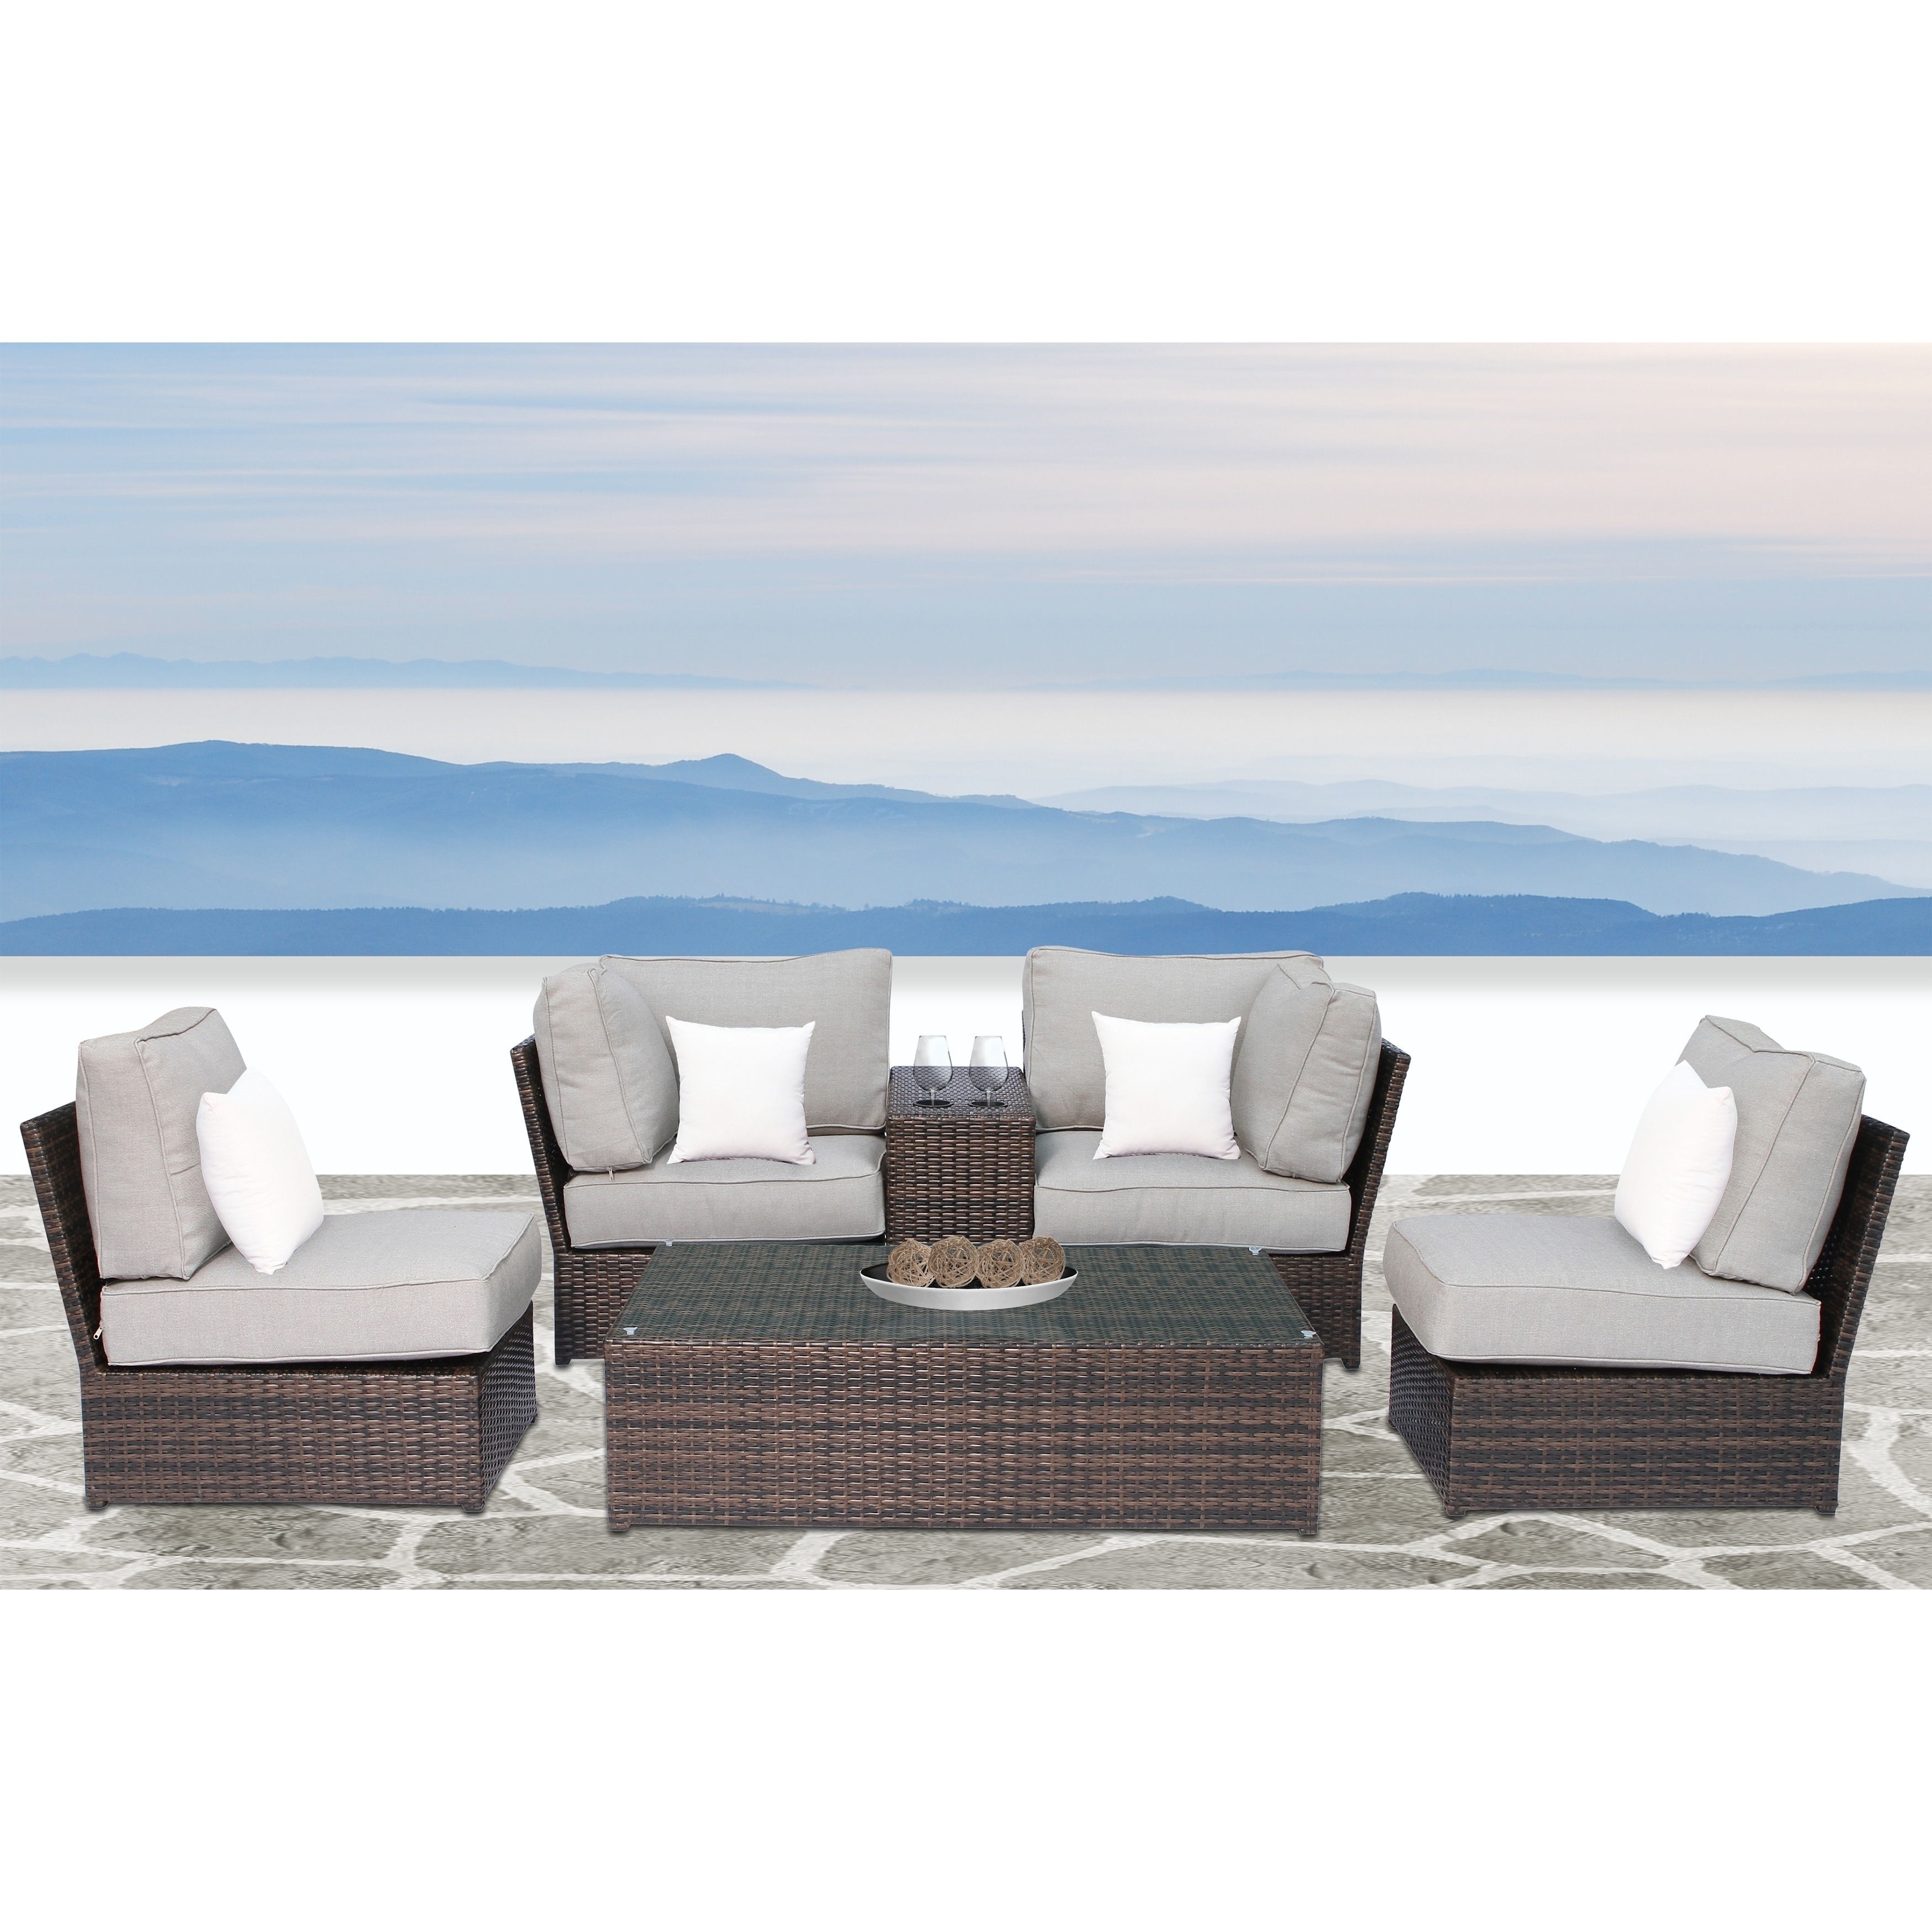 Lucca Cup Holder Table Brown Wicker 6-piece Conversation Set By Living Source International